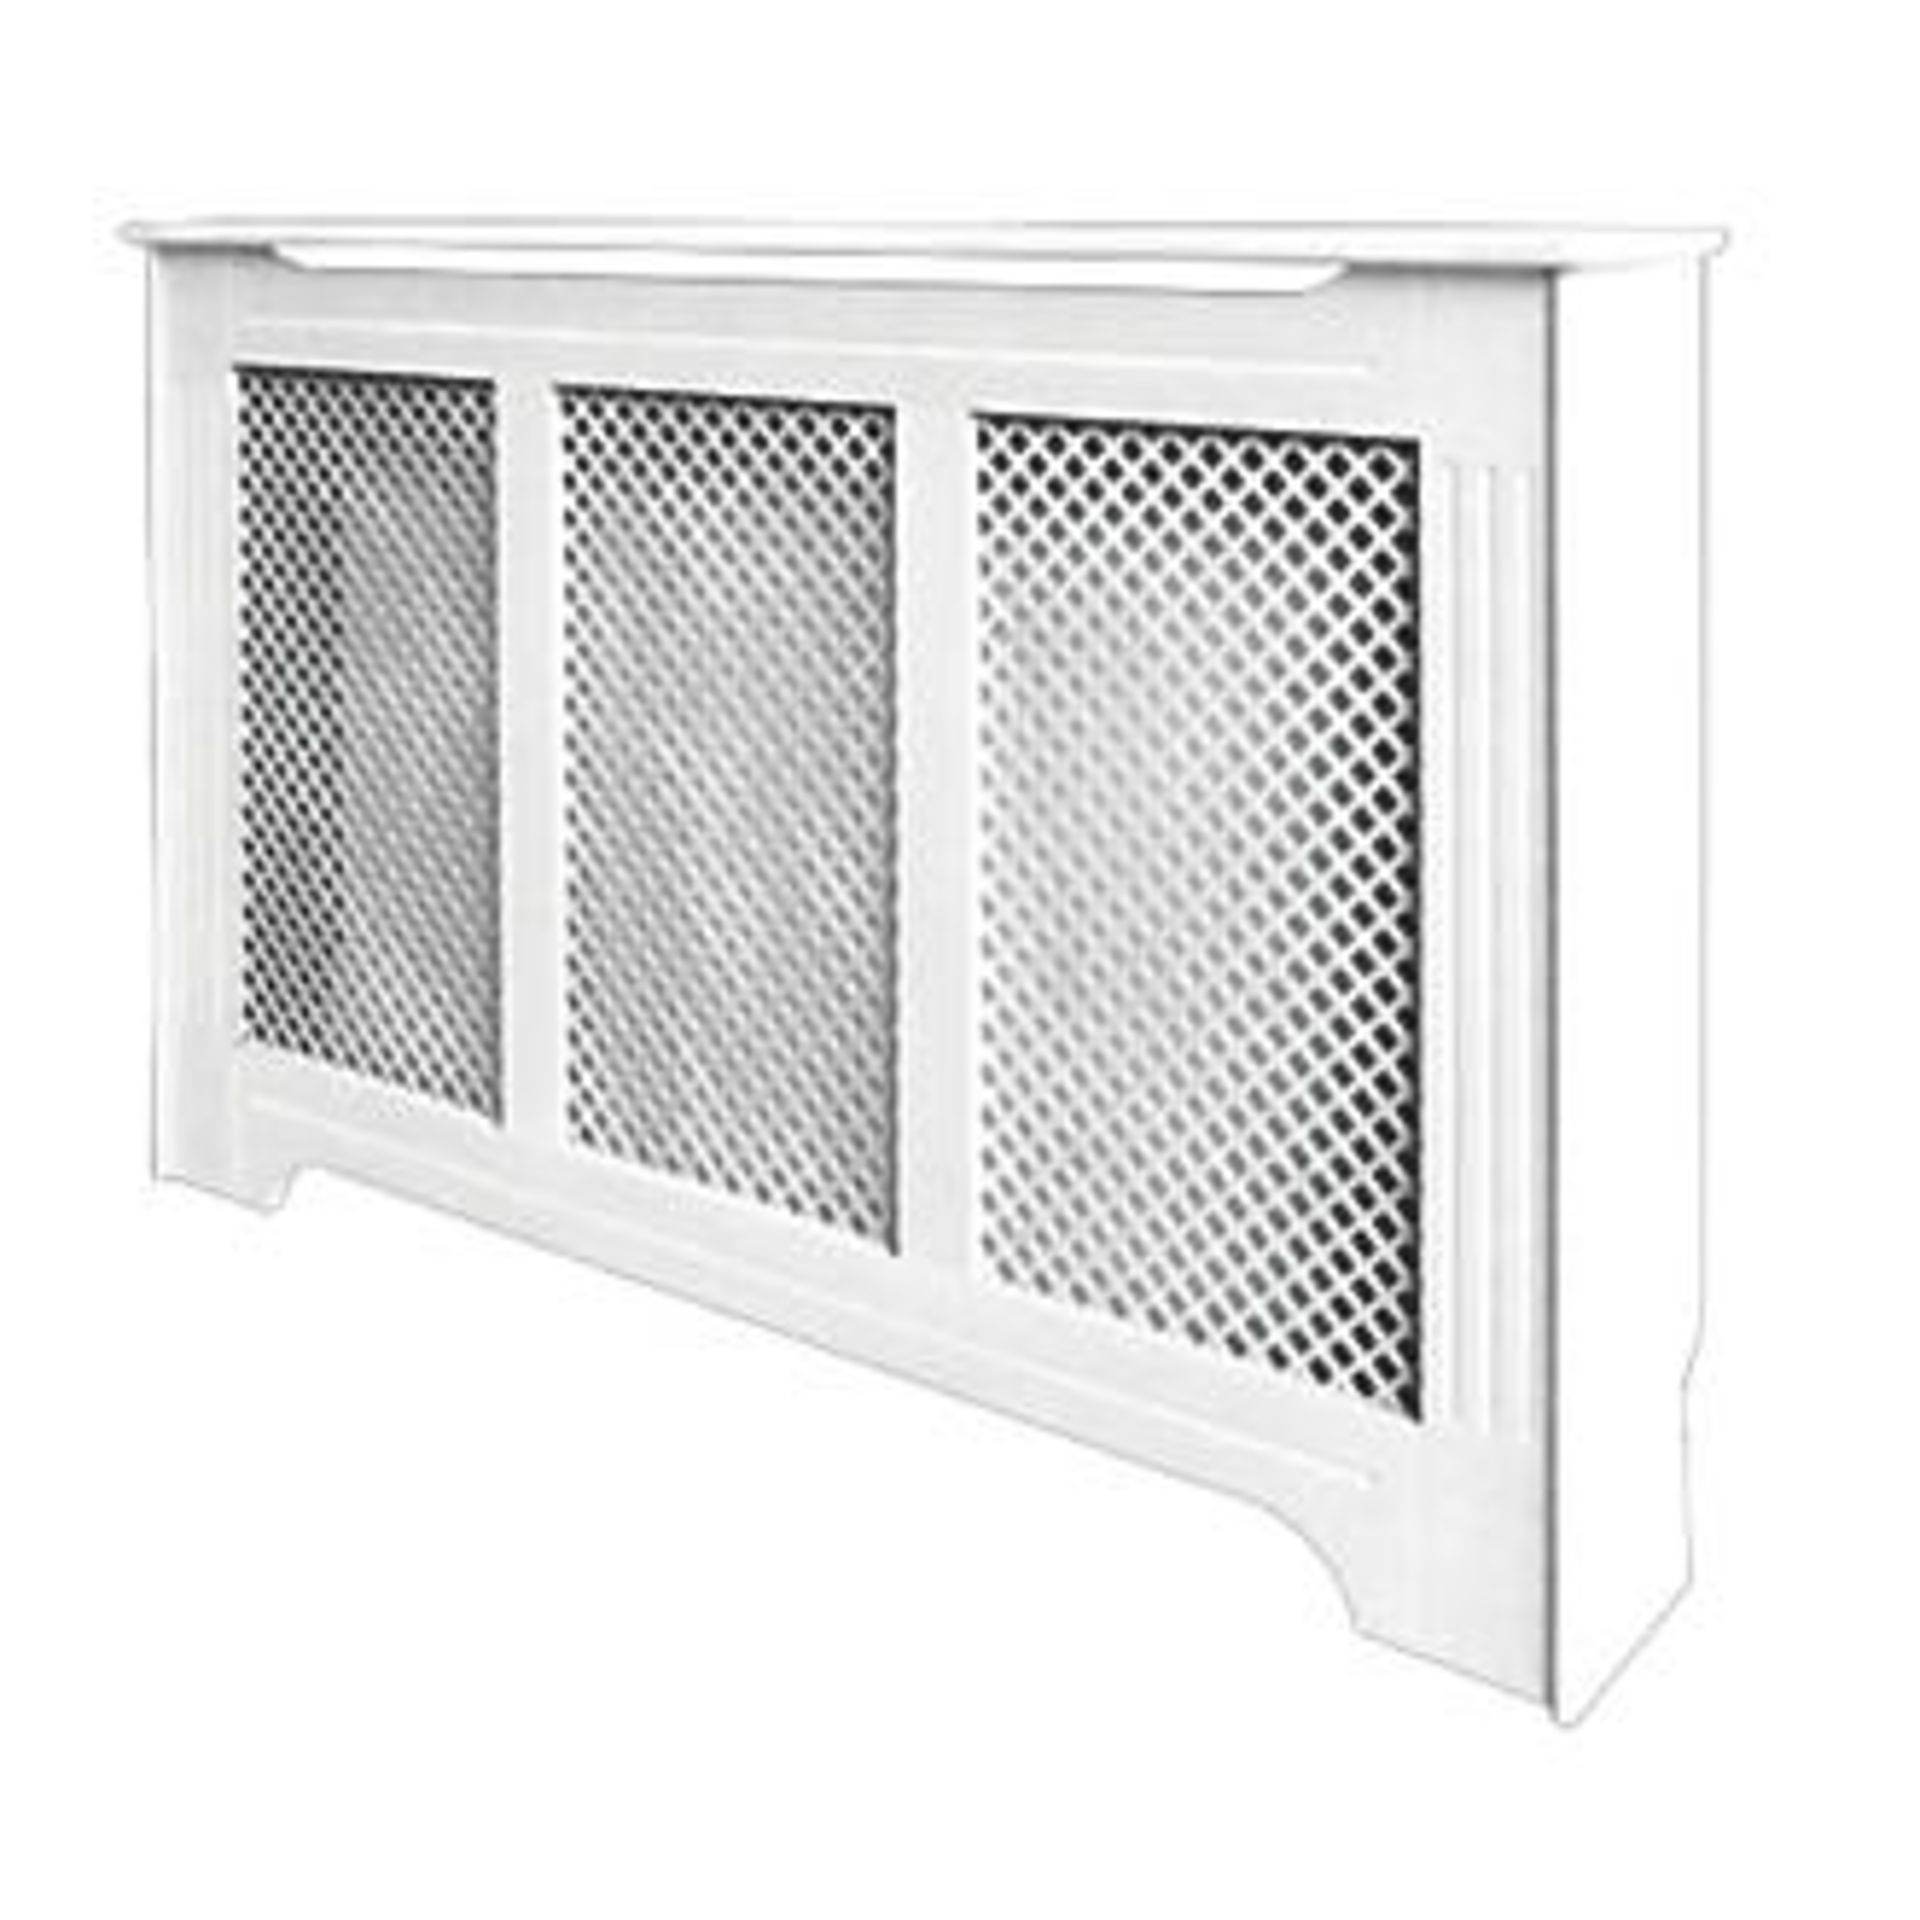 (LL85) 1420 X 210 X 918MM VICTORIAN RADIATOR CABINET WHITE. RRP £124.99. White finish. Provides a